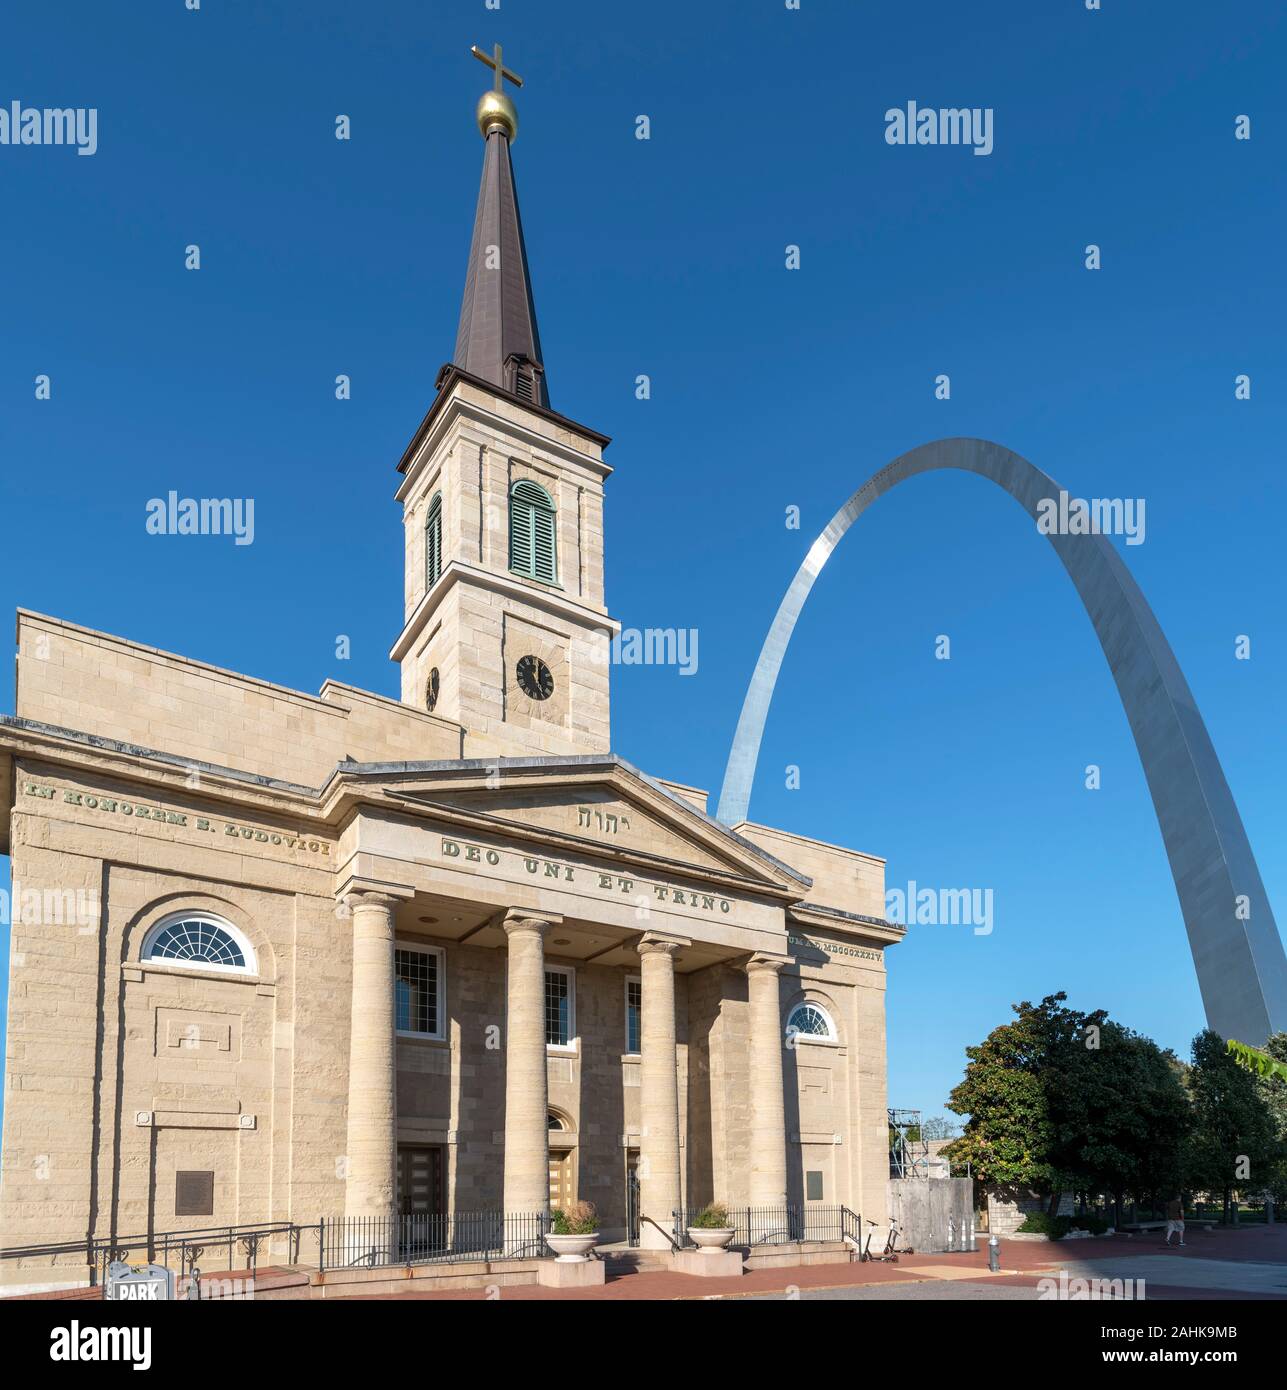 The Old Cathedral (Basilica of St. Louis, King of France) with the Gateway Arch behind, Saint Louis, Missouri, USA Stock Photo